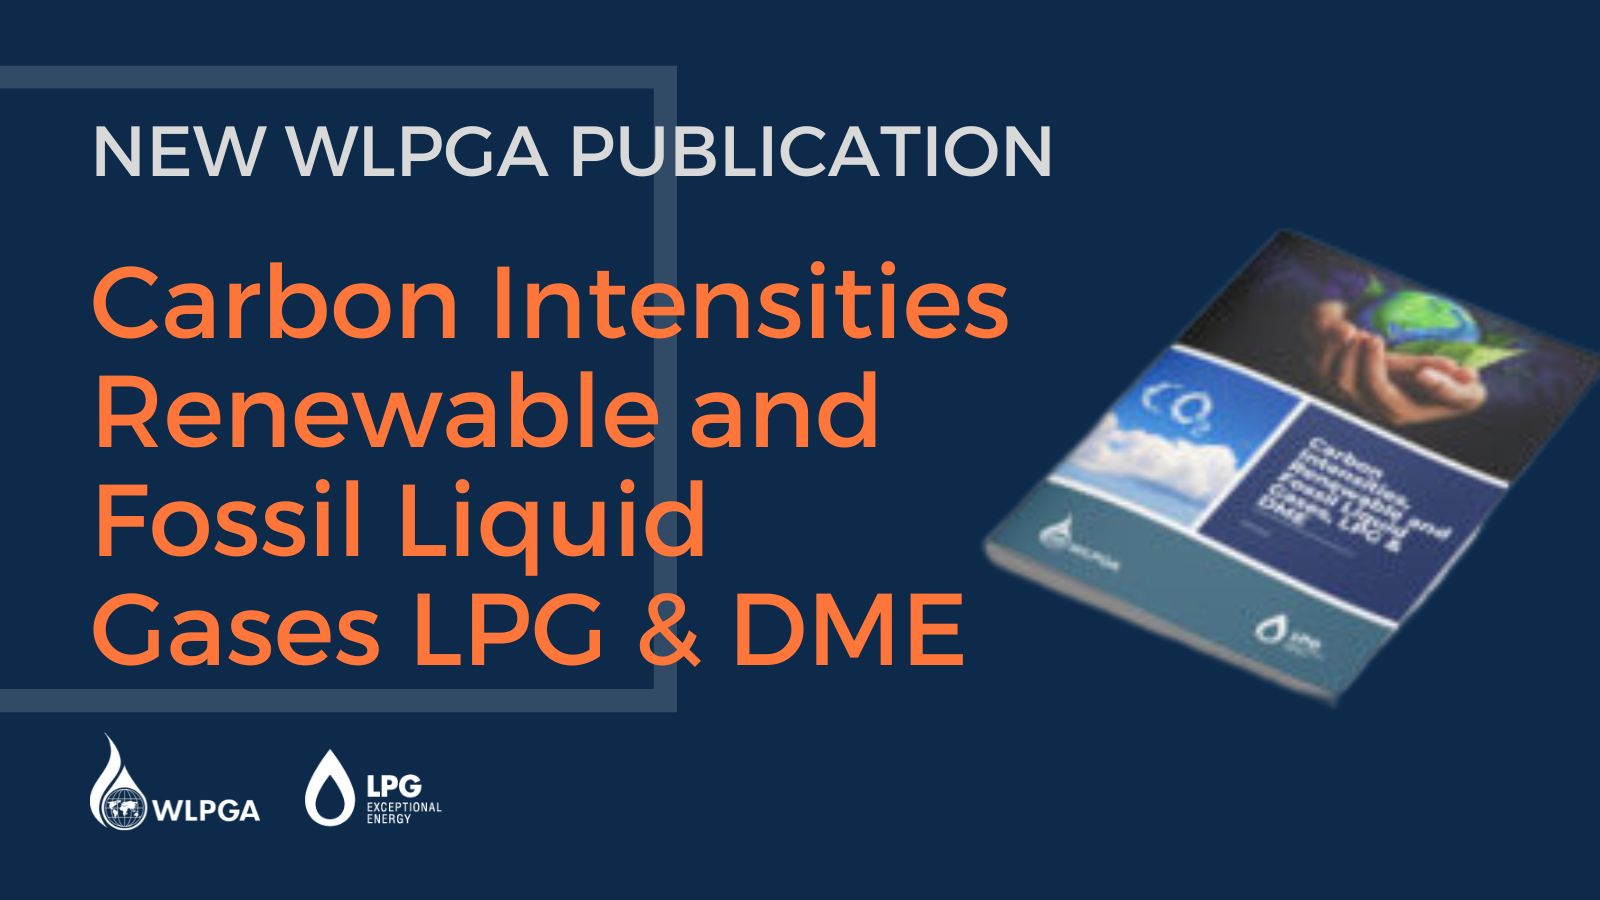 WLPGA "Carbon Intensities, Renewable and Fossil Liquid Gases, LPG & DME"